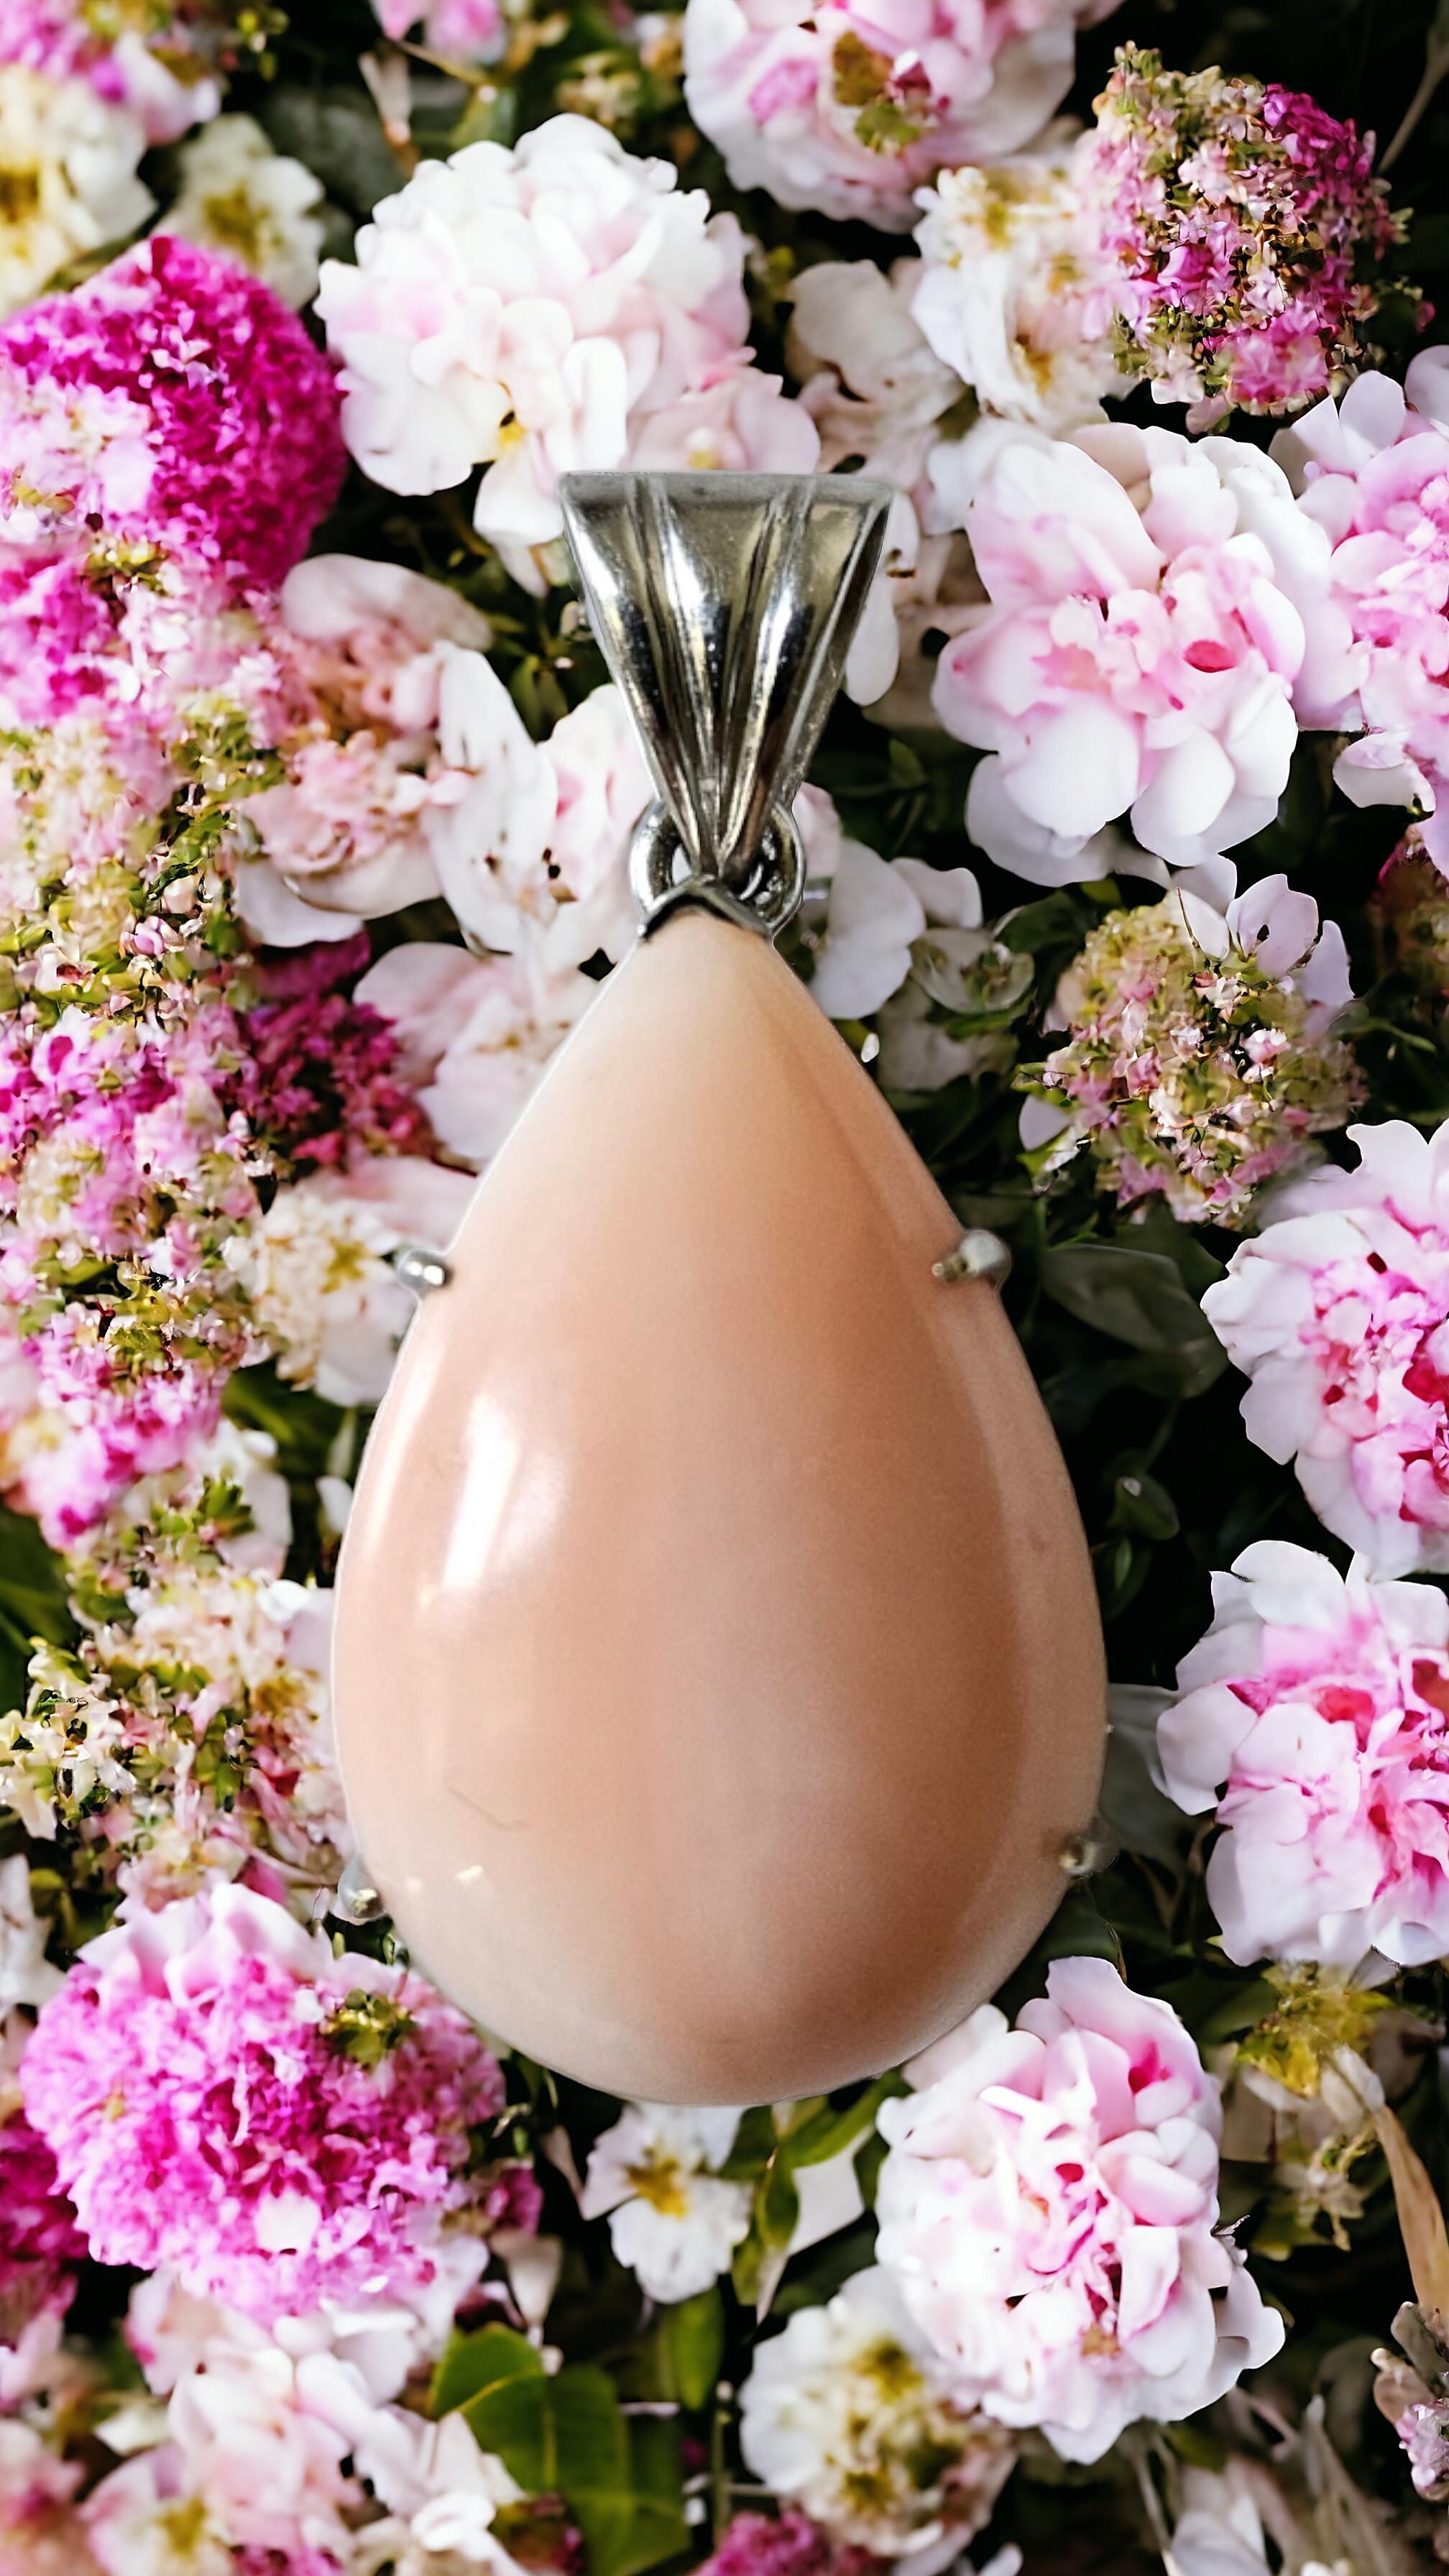 Enhance your jewelry collection with this stunning LaFrancee pendant. The 14k yellow gold pendant features a natural certified angel skin coral stone in a beautiful orange-pink color. The pendant's theme is inspired by nature and would make a